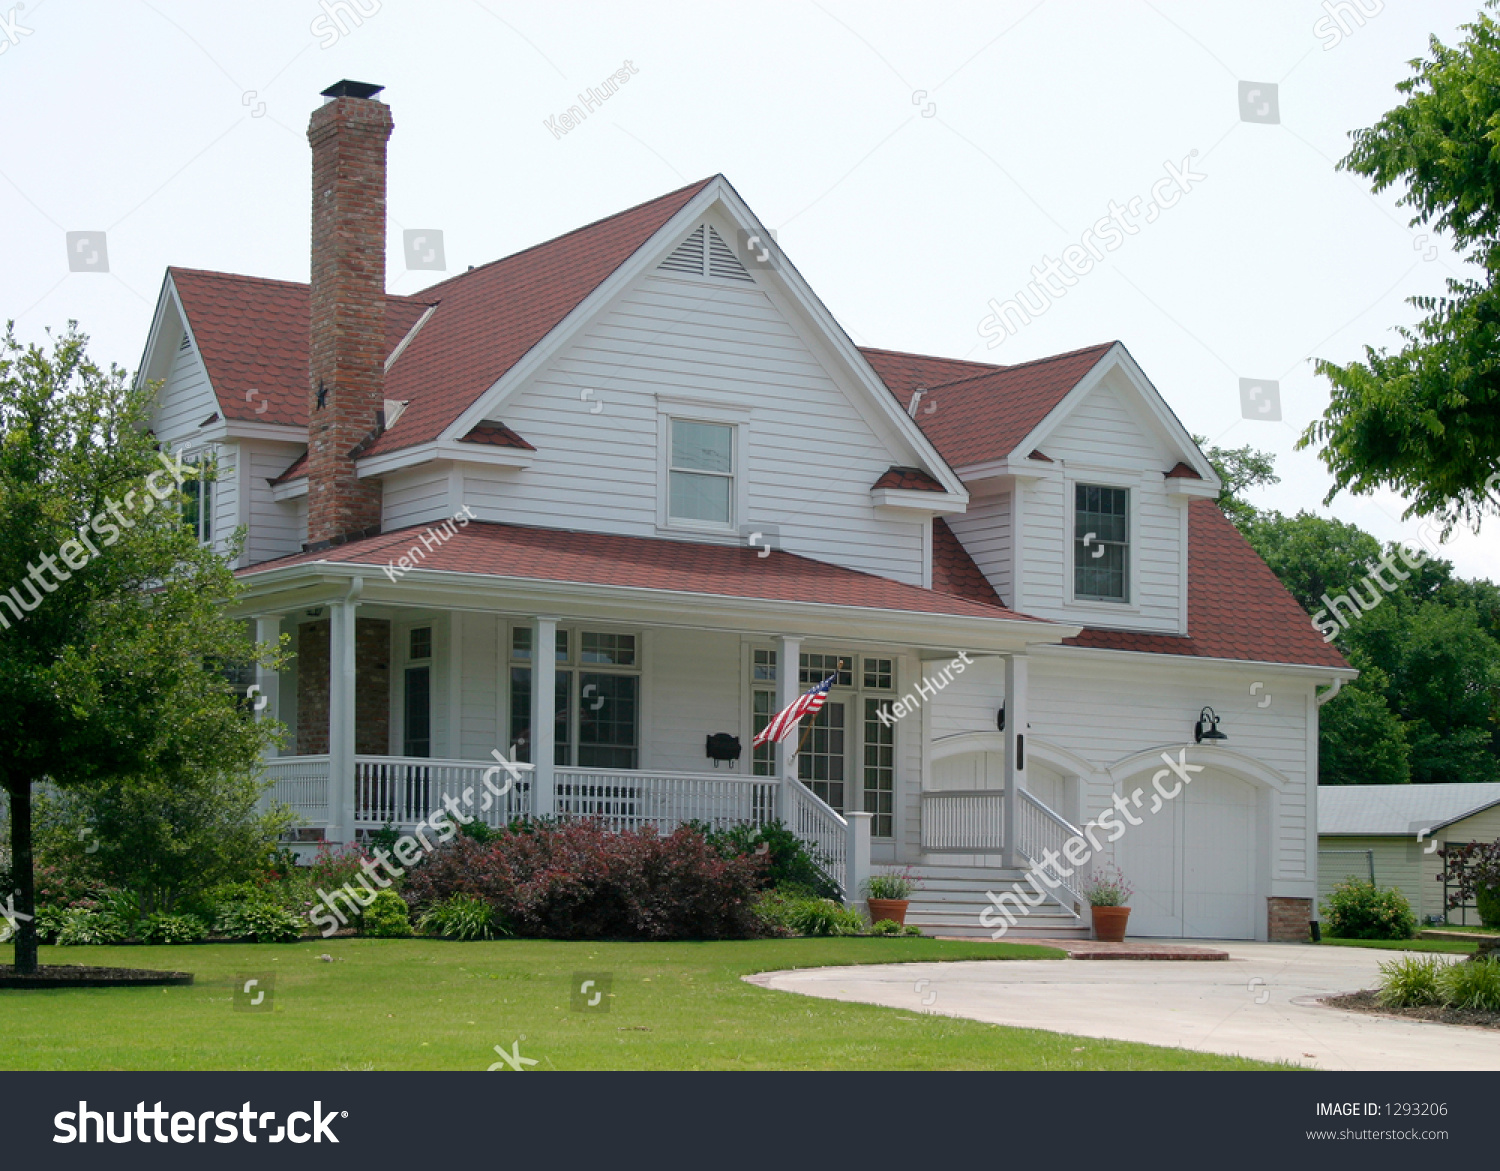 Modern Classic New Old House Design Stock Photo 1293206 Shutterstock